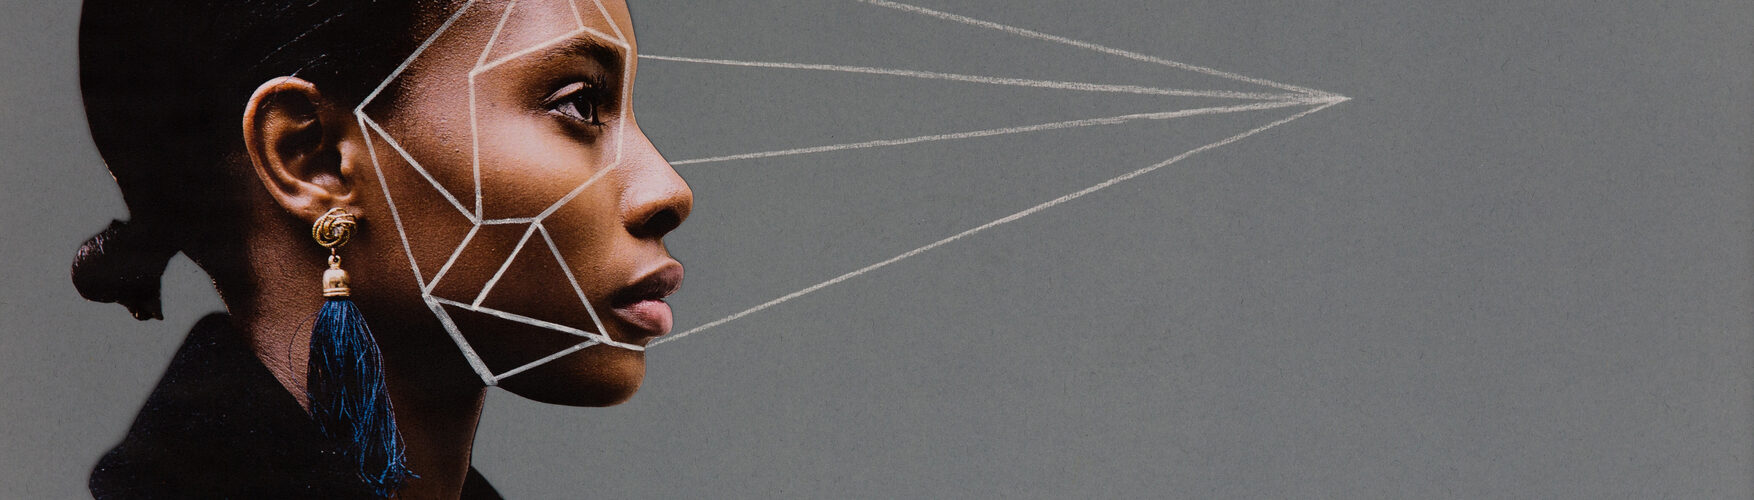 Analogue collage featuring a black woman in profile, with geometric shapes drawn onto her face, to map ways of calculating her beauty, with converging perspective lines.